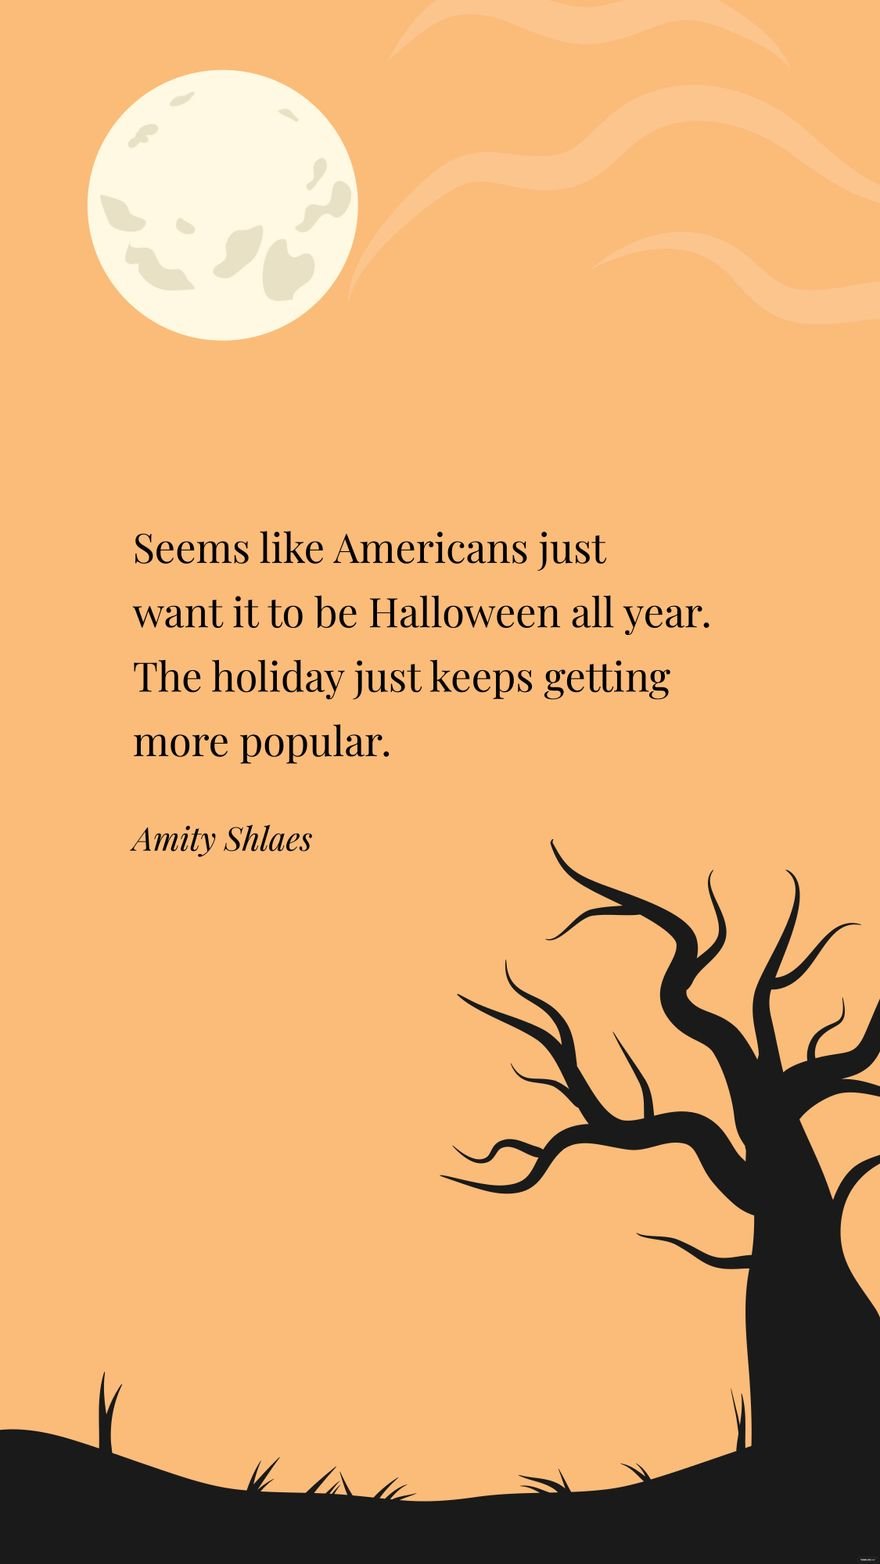 Free  Amity Shlaes- Seems like Americans just want it to be Halloween all year. The holiday just keeps getting more popular. 